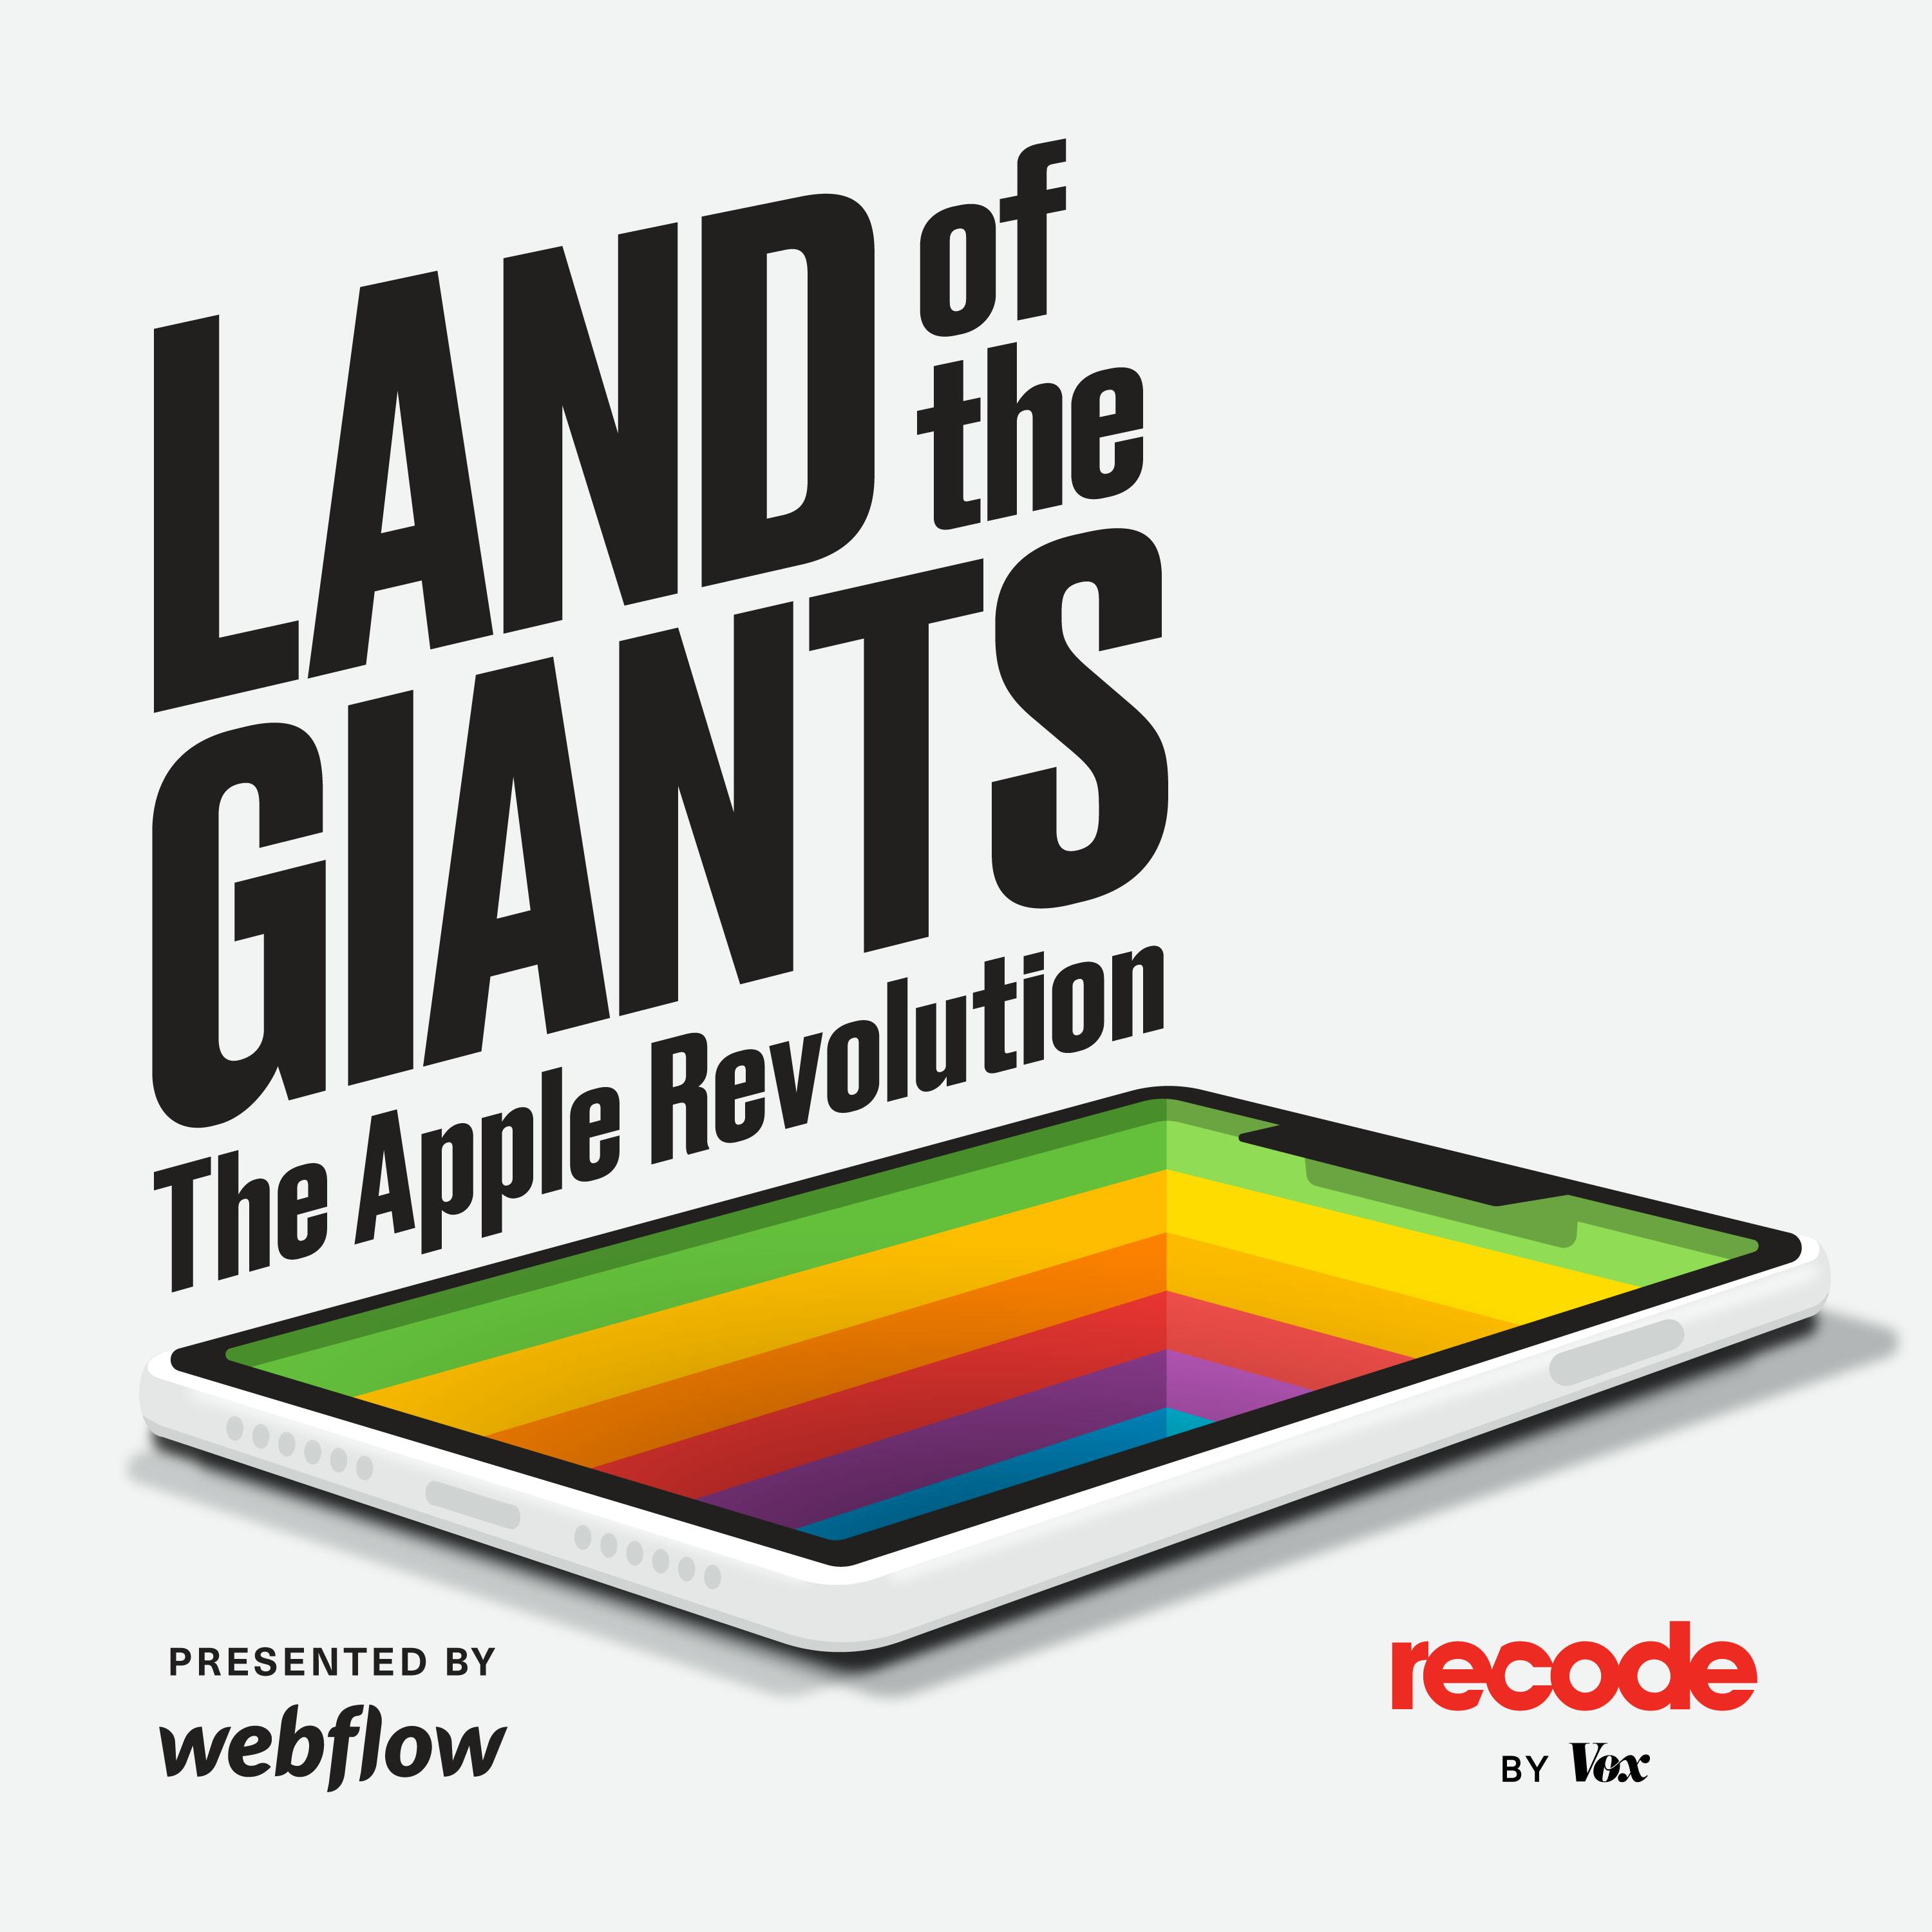 ’The Apple Revolution’ is here